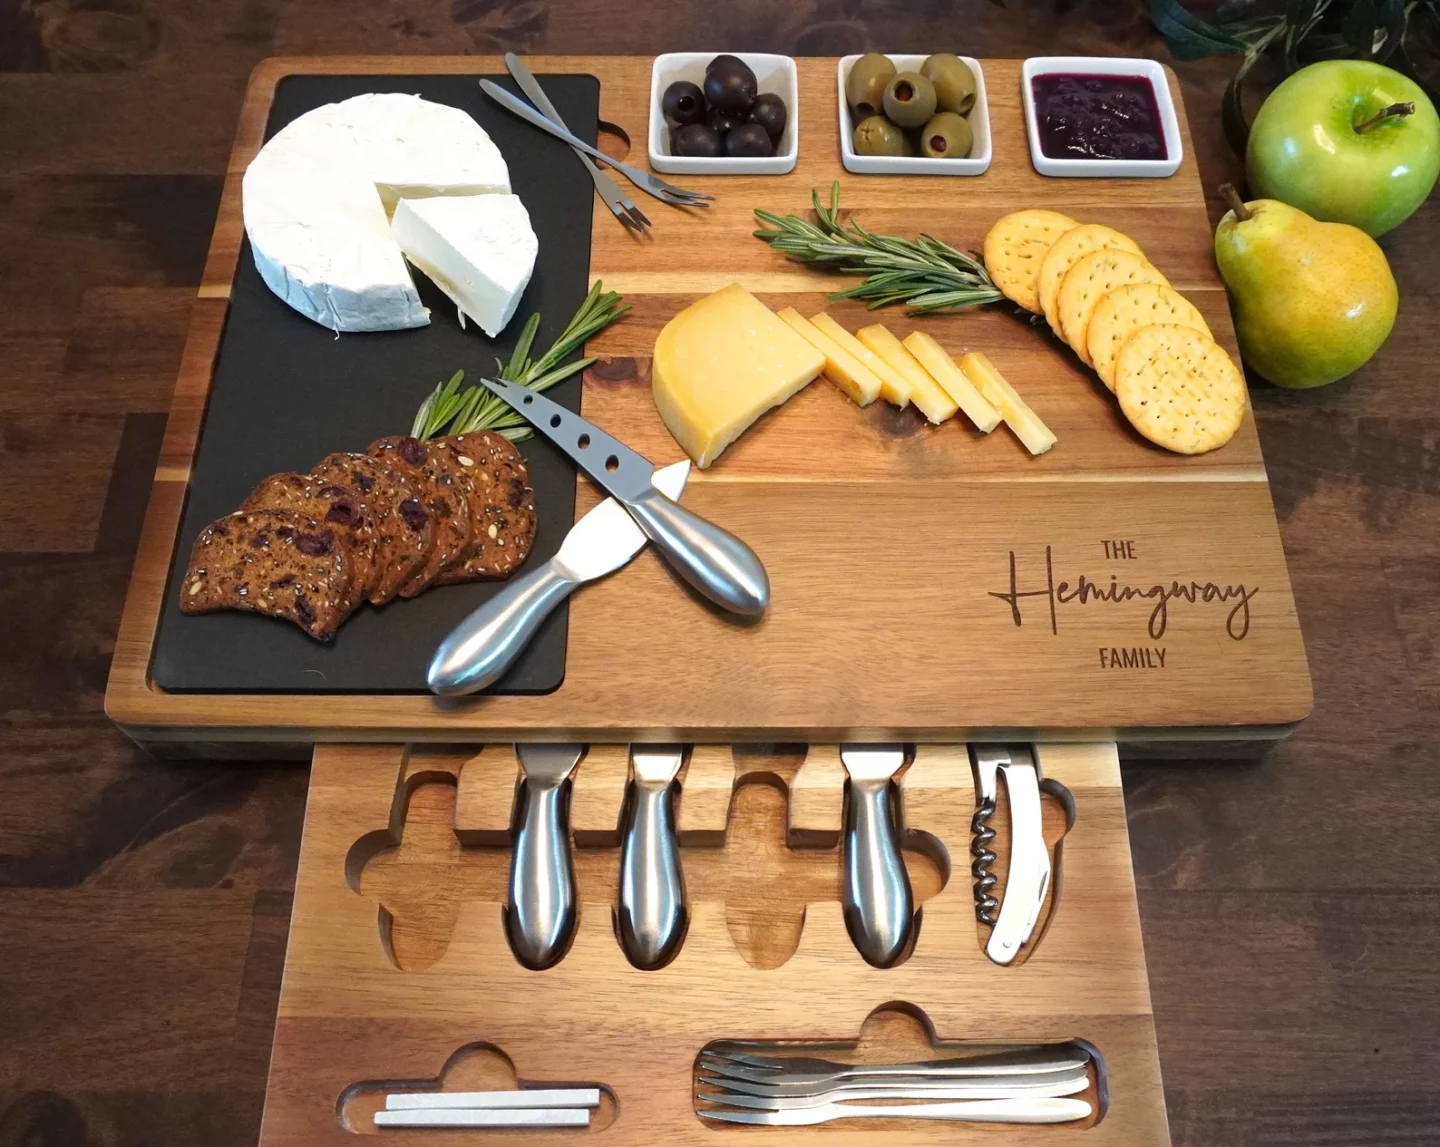 Charcuterie board with utensils included from Etsy